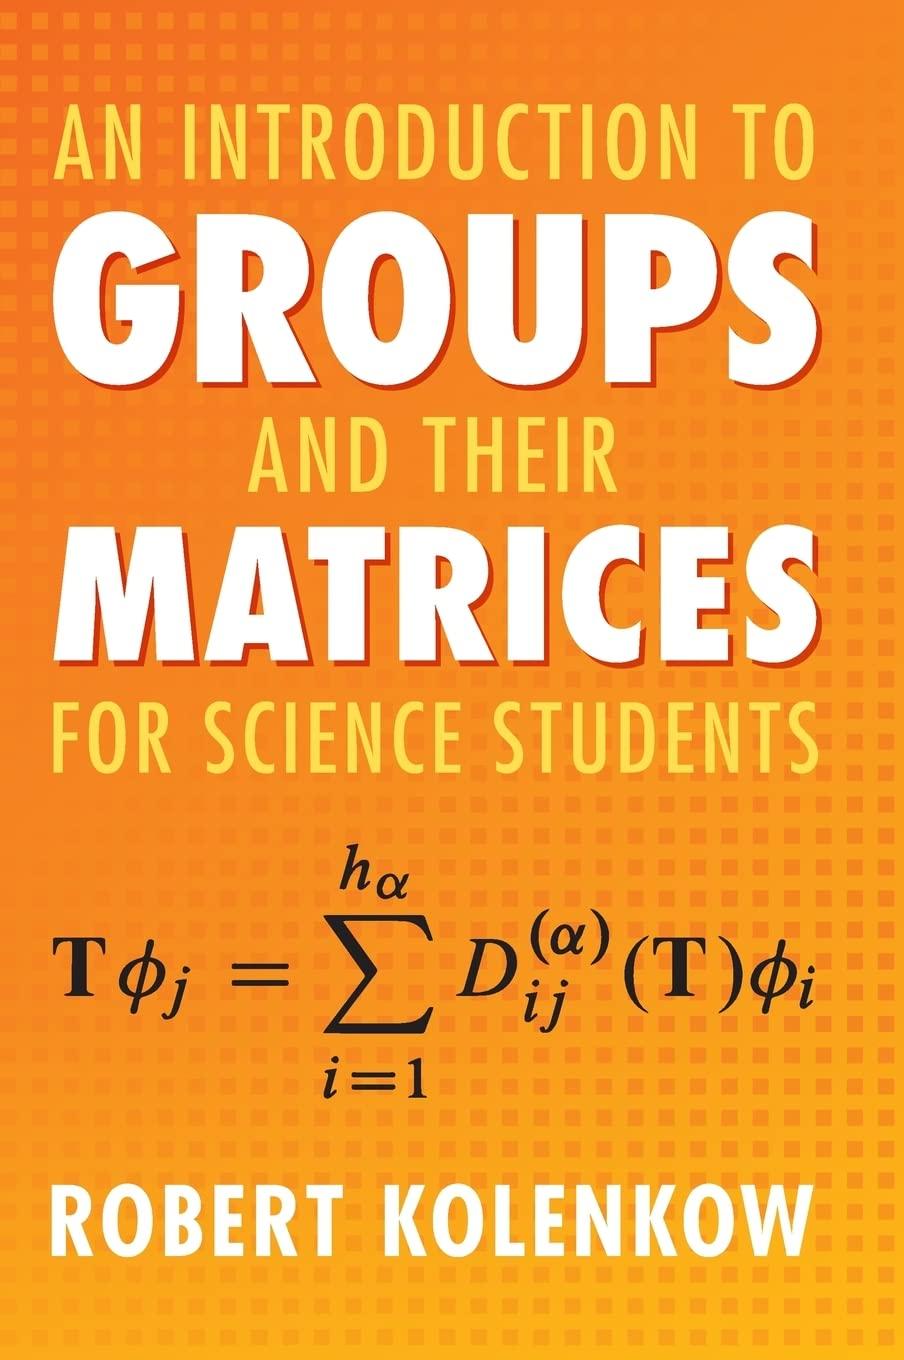 An Introduction To Groups And Their Matrices For Science Students